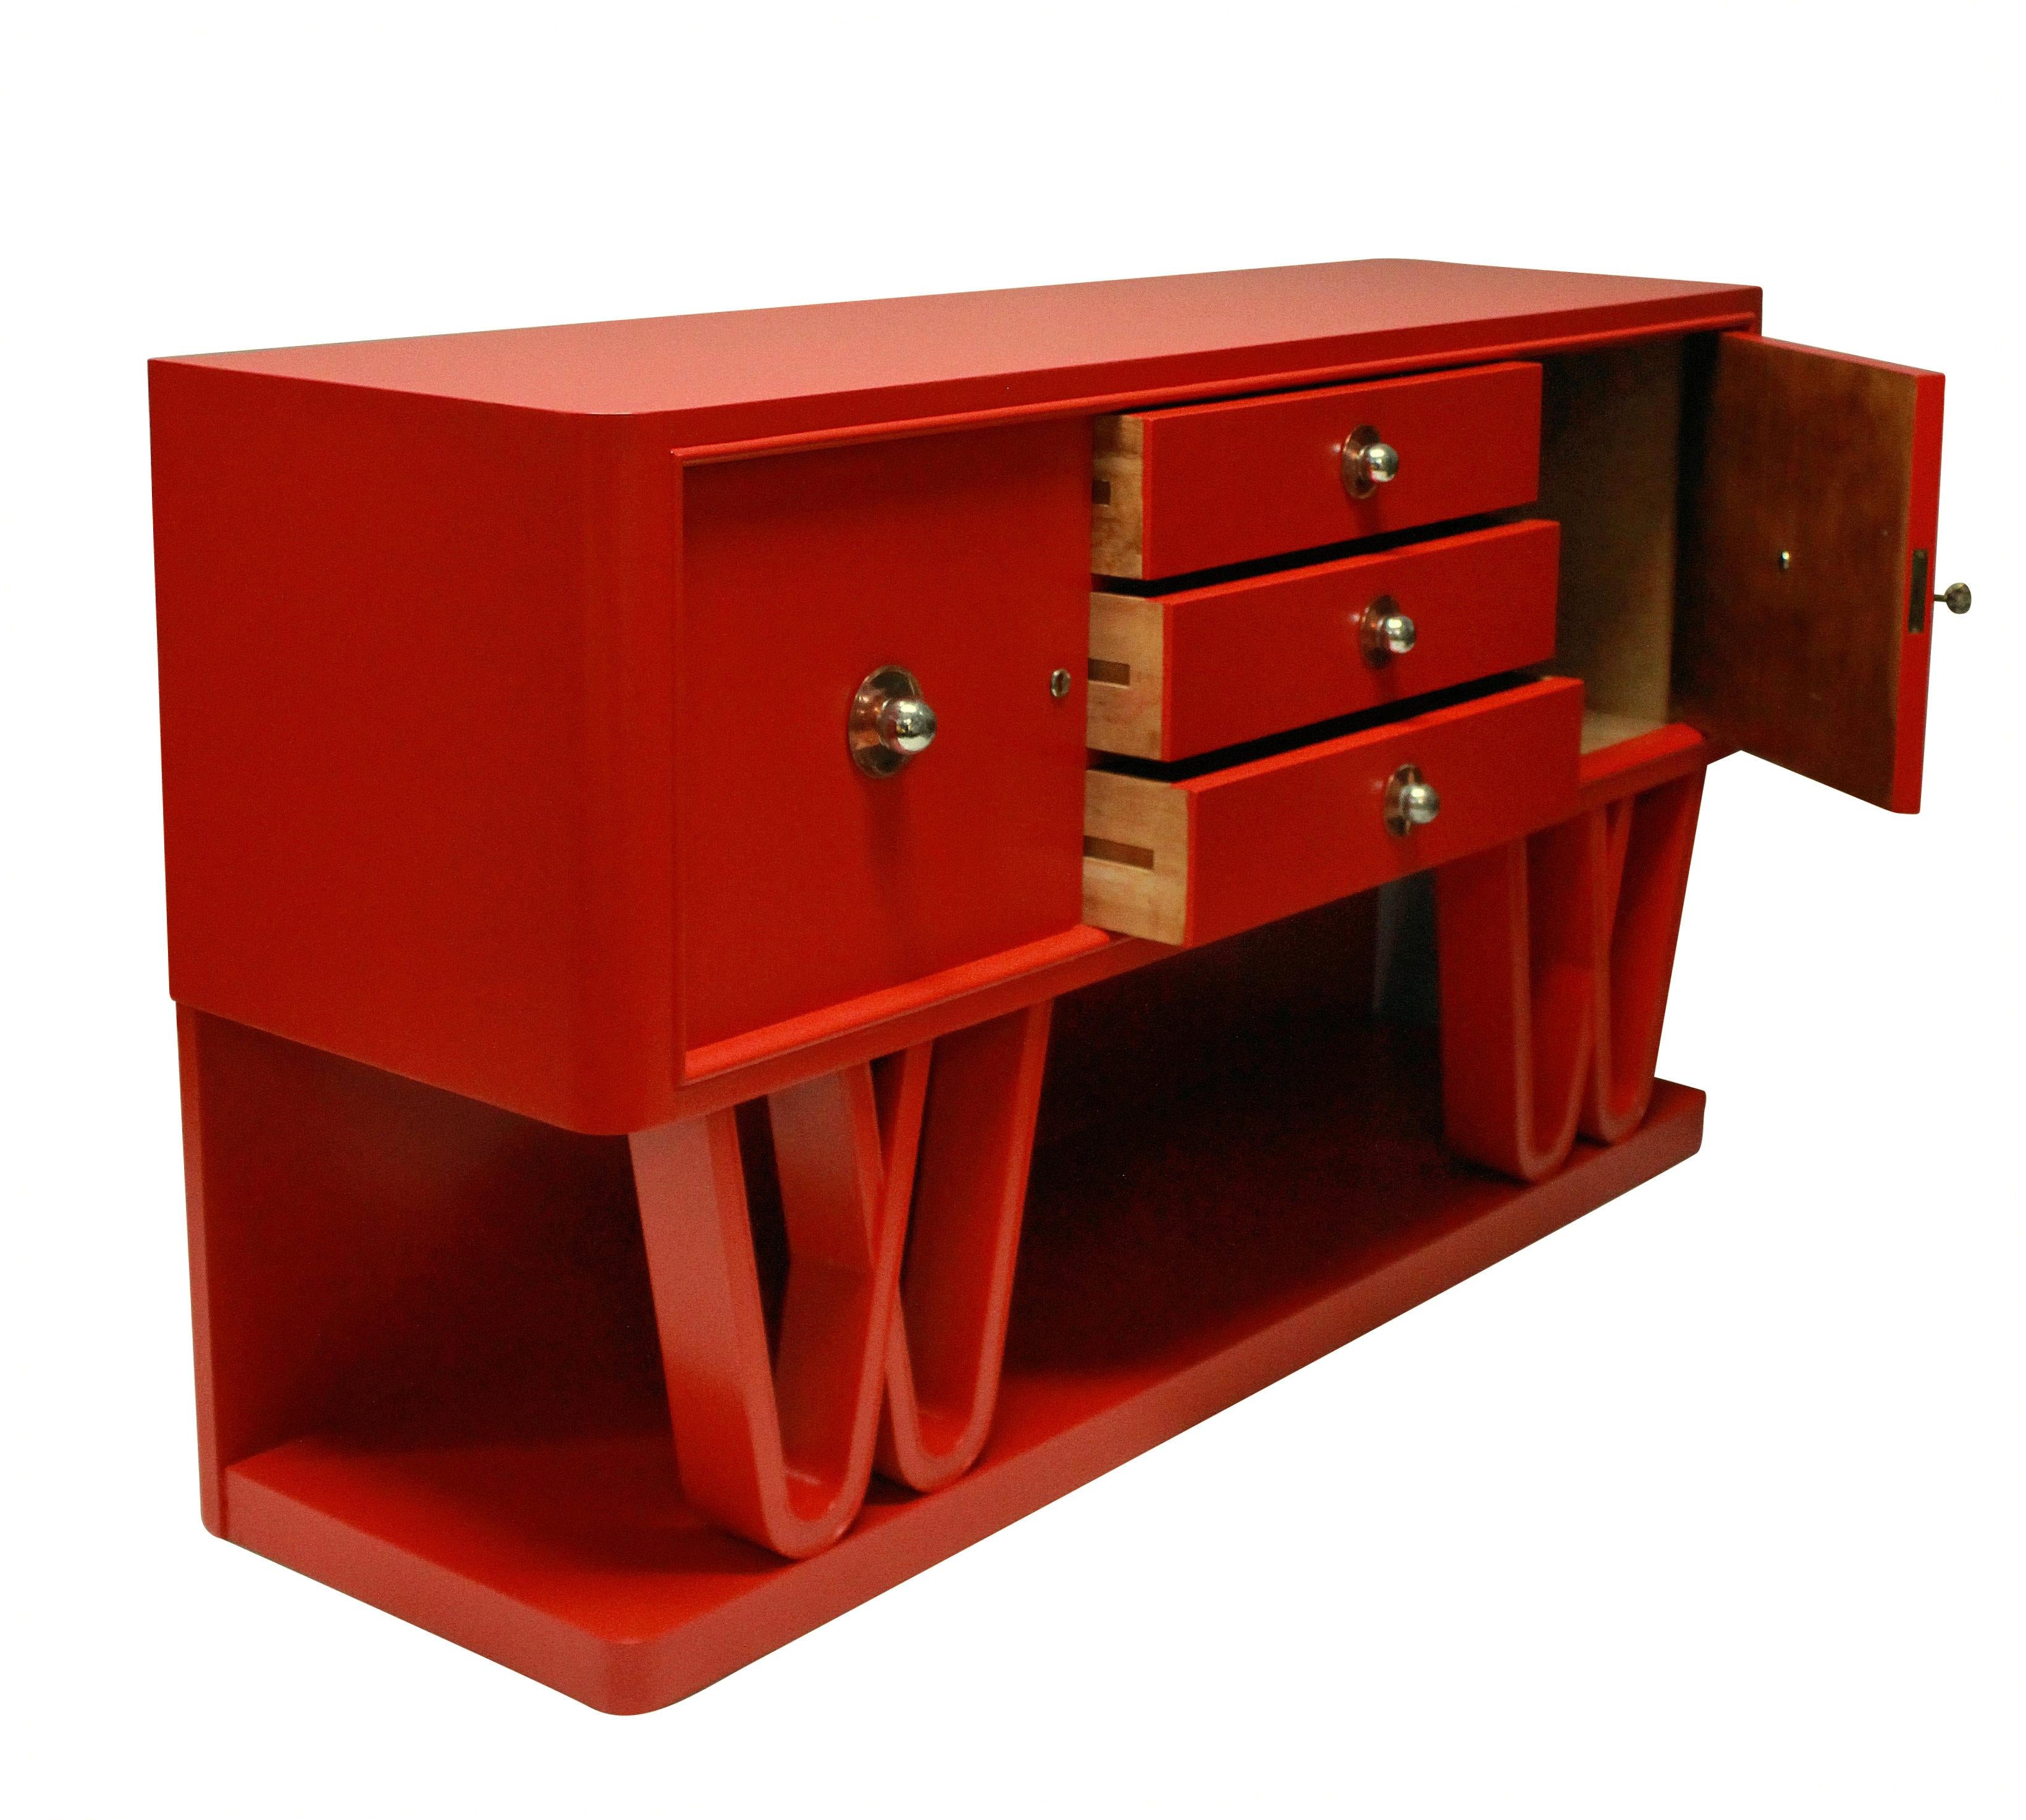 A stunning Italian midcentury credenza in scarlet lacquer, two cupboards and three drawers sit upon an attractive scrolled base. The handles of copper and chrome and the cupboards are lockable.